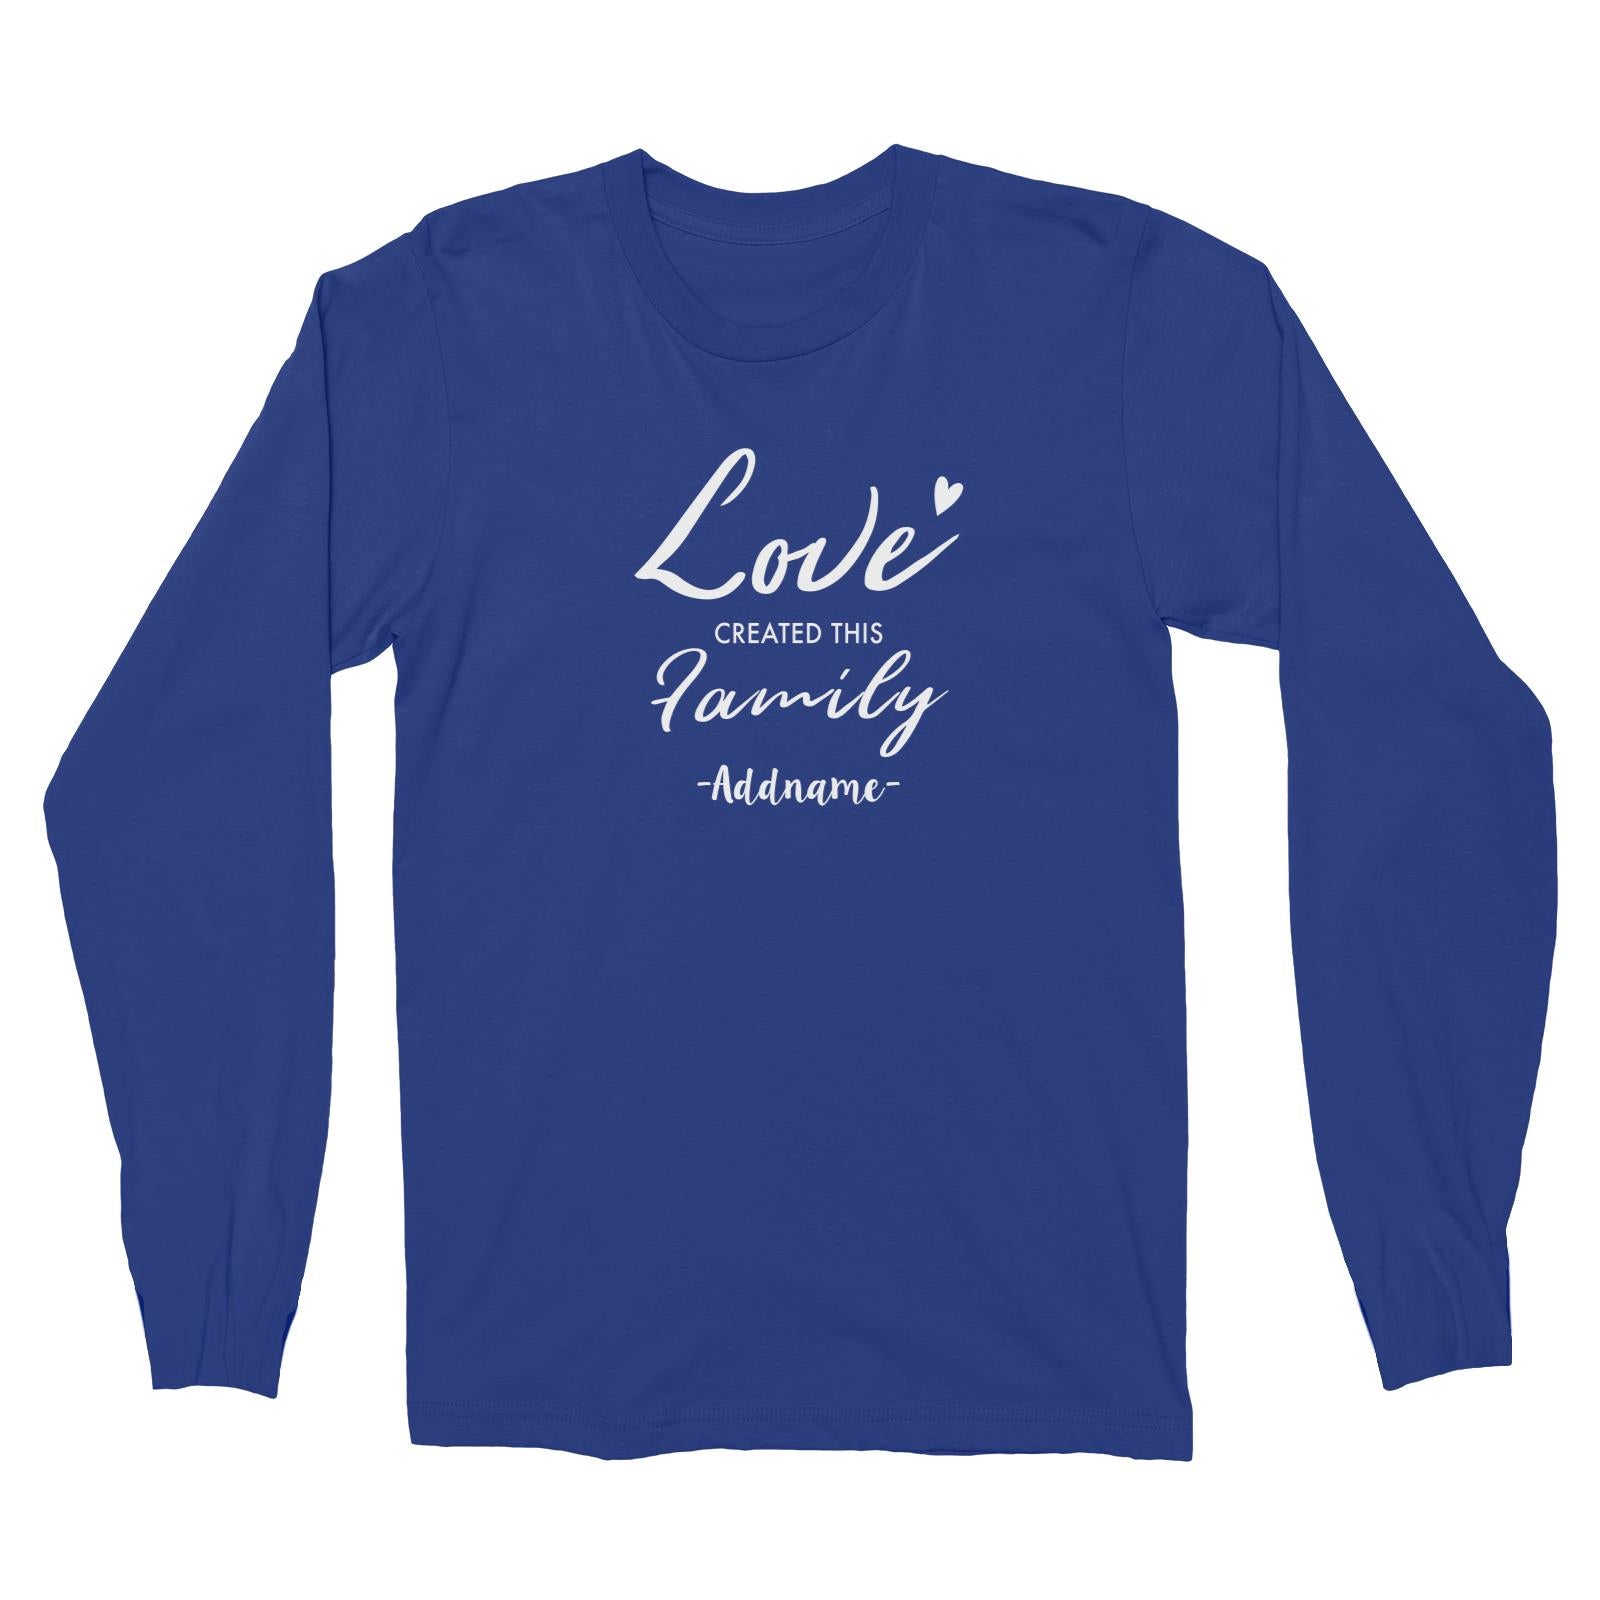 Love Created This Family Addname Long Sleeve Unisex T-Shirt  Matching Family Personalizable Designs